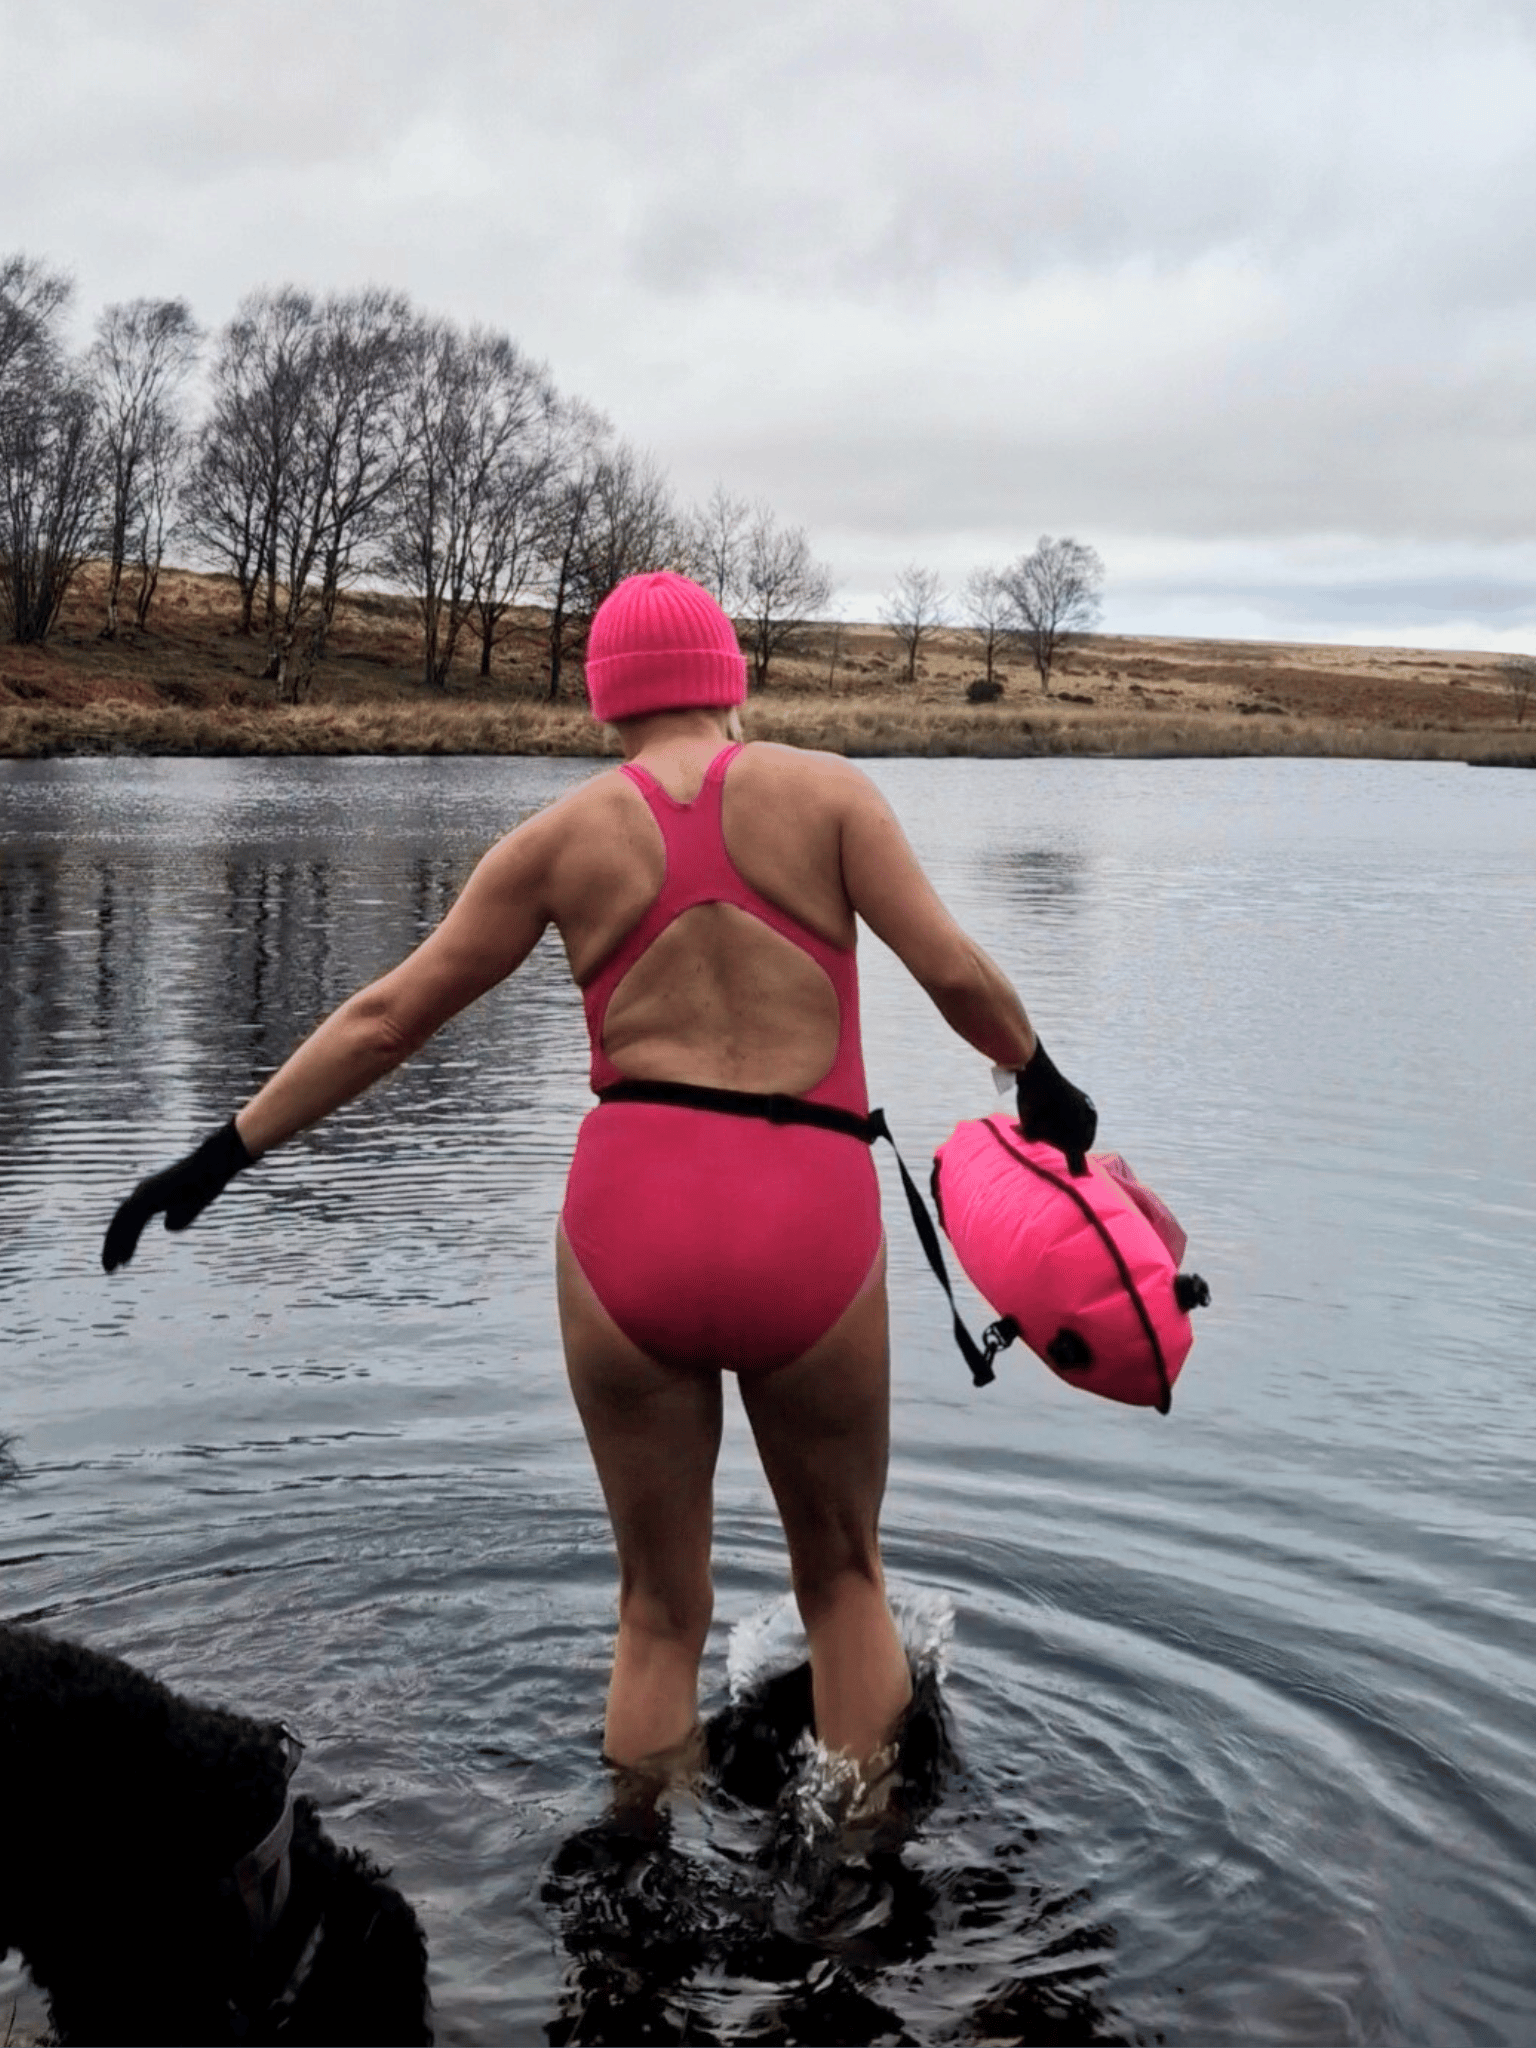 lady in pink hat, pink costume and carrying a  pink tow float making her way into a lake 